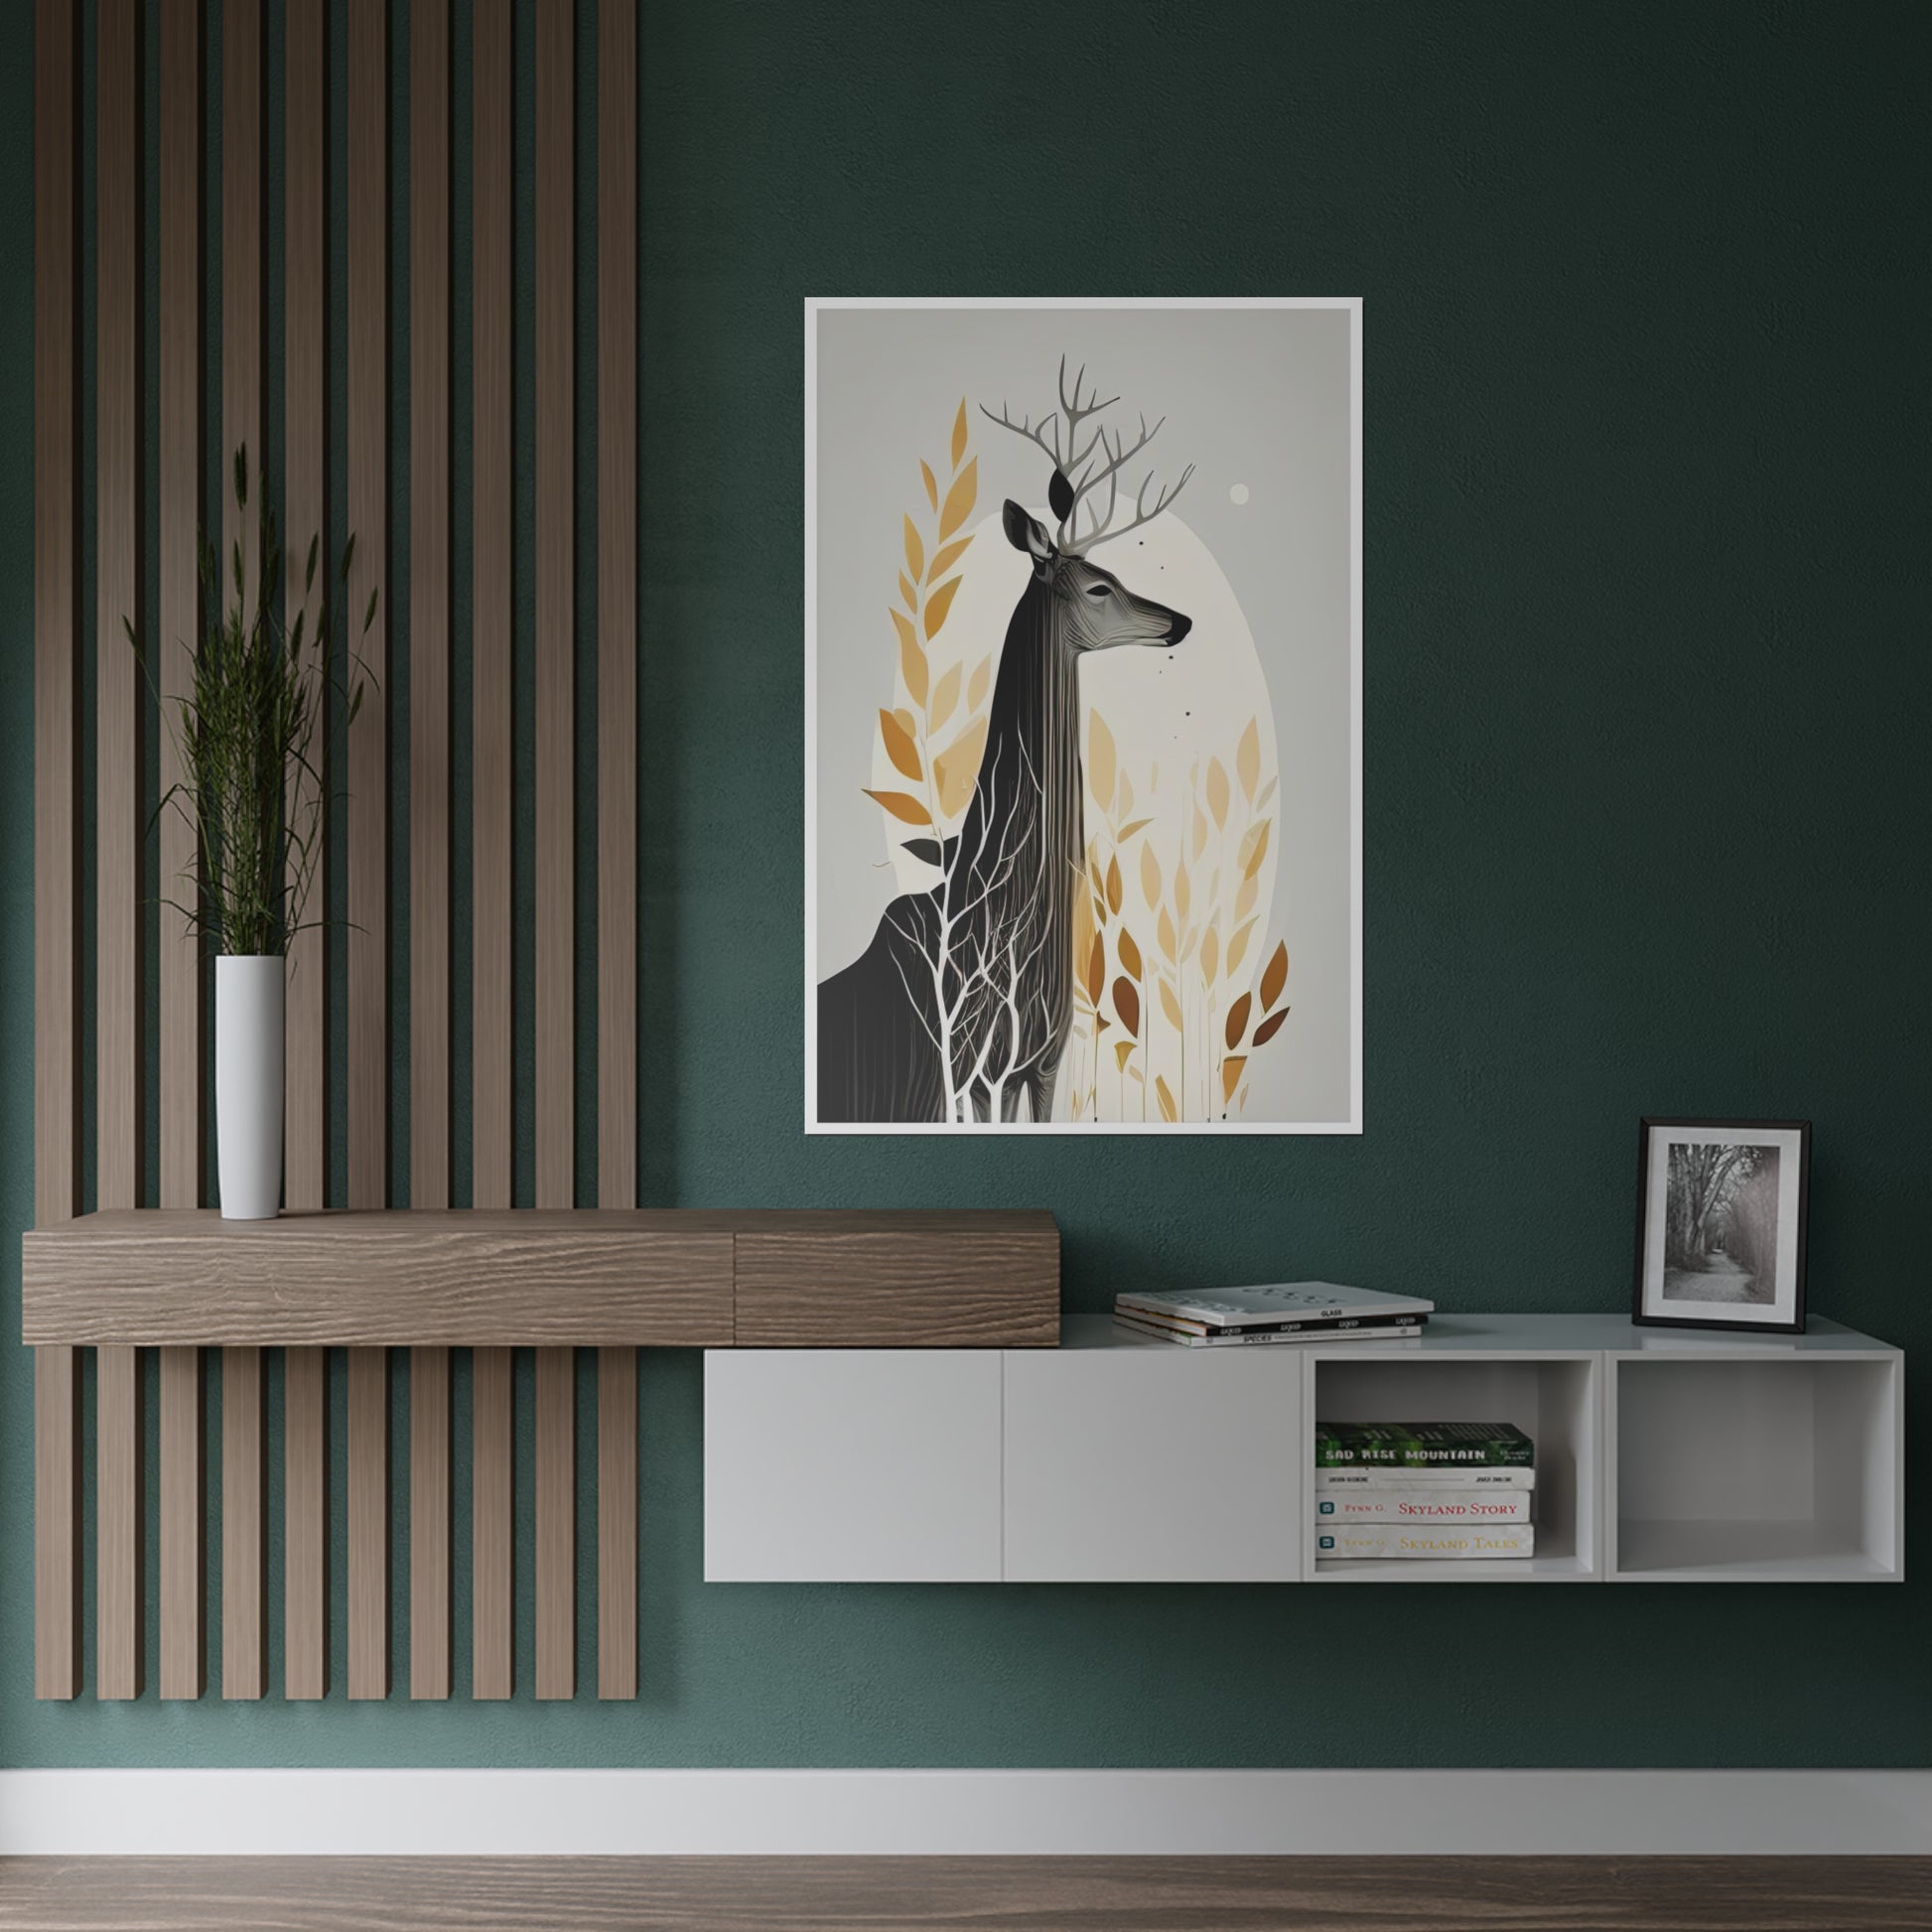 Palette of Tranquility (1/3) The Stag's Serenity - Satin Poster beautifully captures the serene grandeur of a male deer in half-profile, its gaze subtly engaging the viewer. Using a monochrome palette of greys and blacks, the deer's intricate details stand out against a softer silhouette. A minimalist backdrop of foliage adds depth, while gentle gradients and dappled shadows enhance the calm atmosphere. A hint of warm yellow breathes life and contrast, completing this tranquil composition.